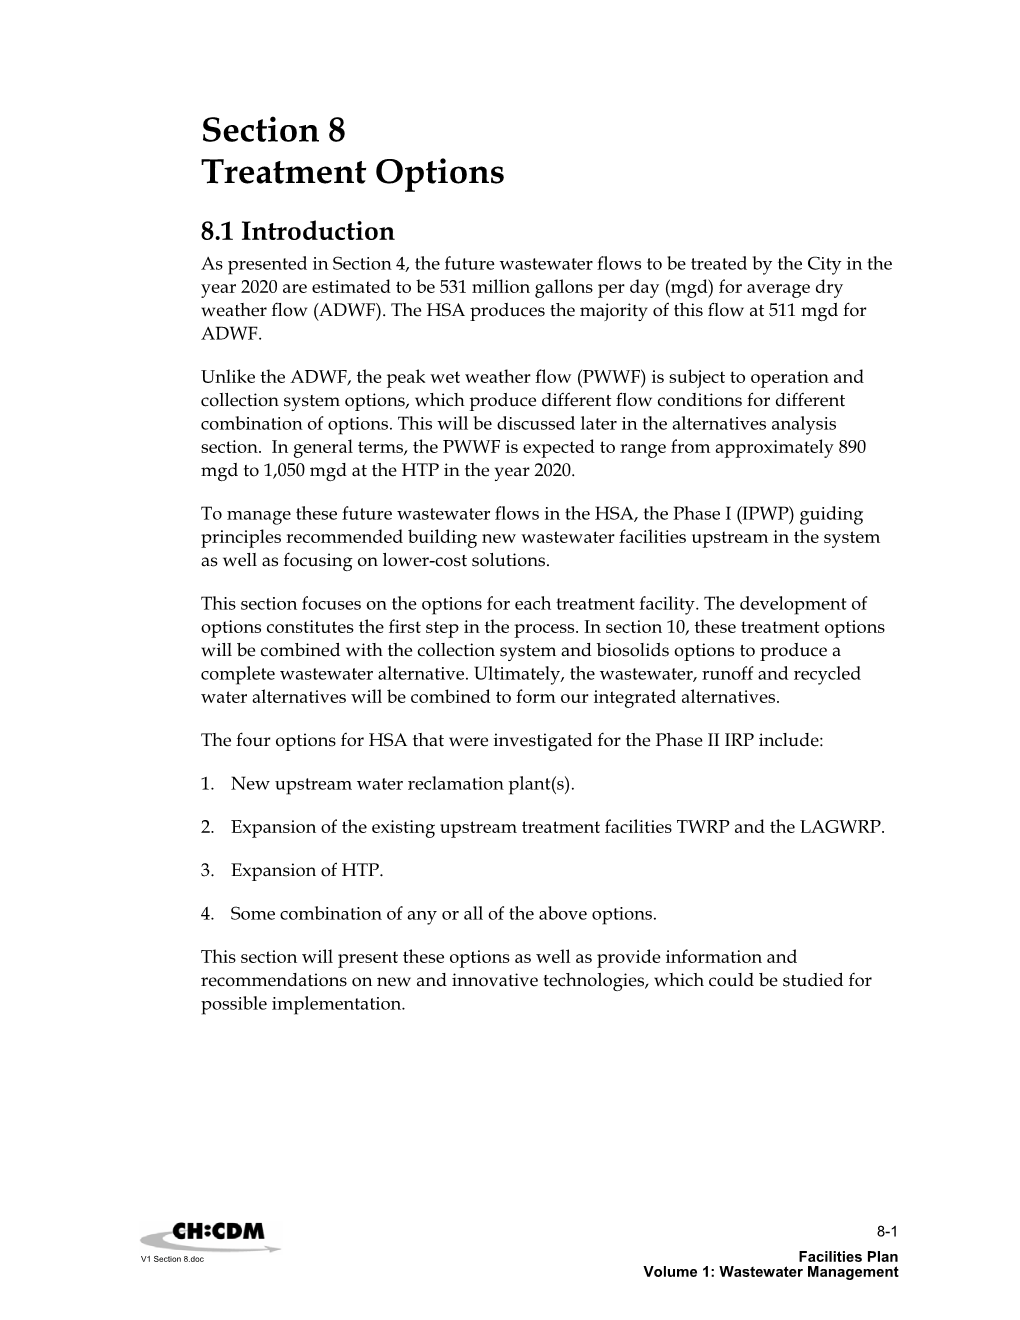 Section 8 Treatment Options